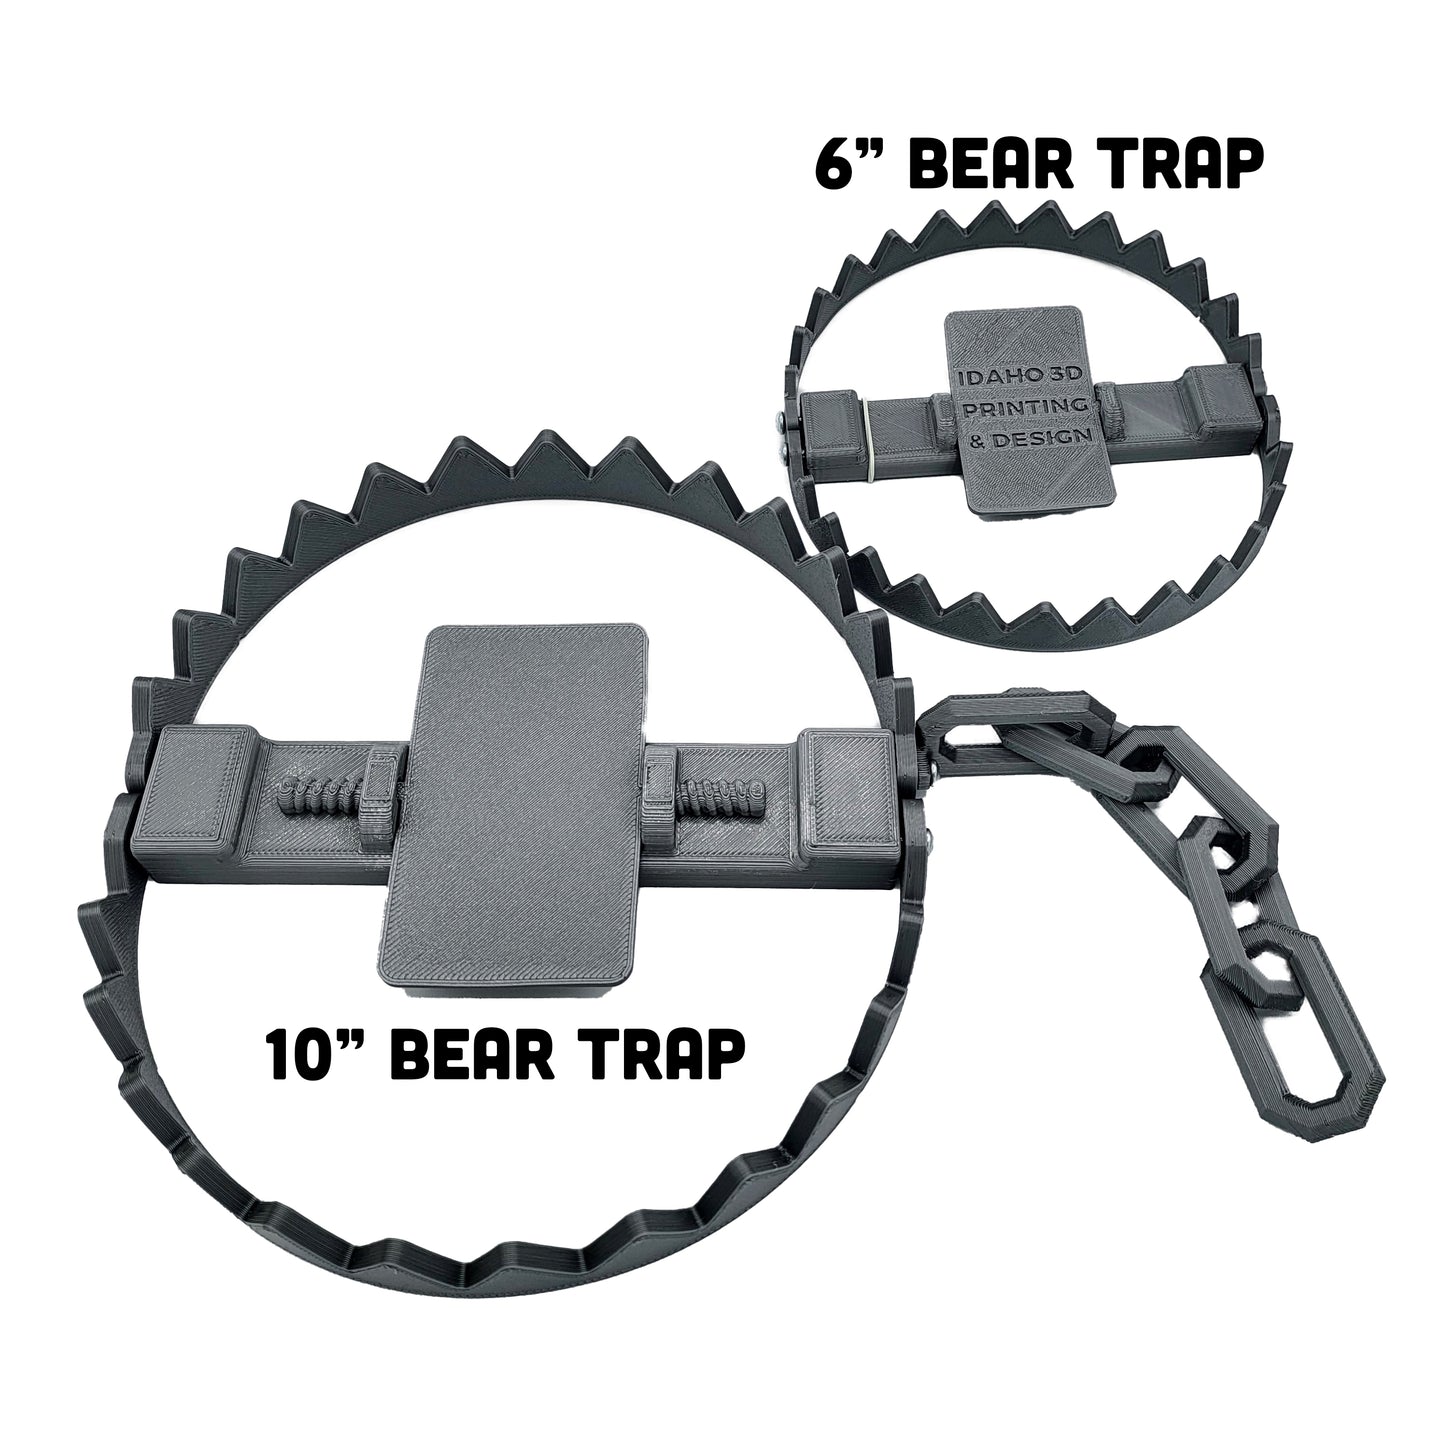 Large 10" - Bear Trap |Great for Halloween | Role Playing | Cosplay | Kids Toys